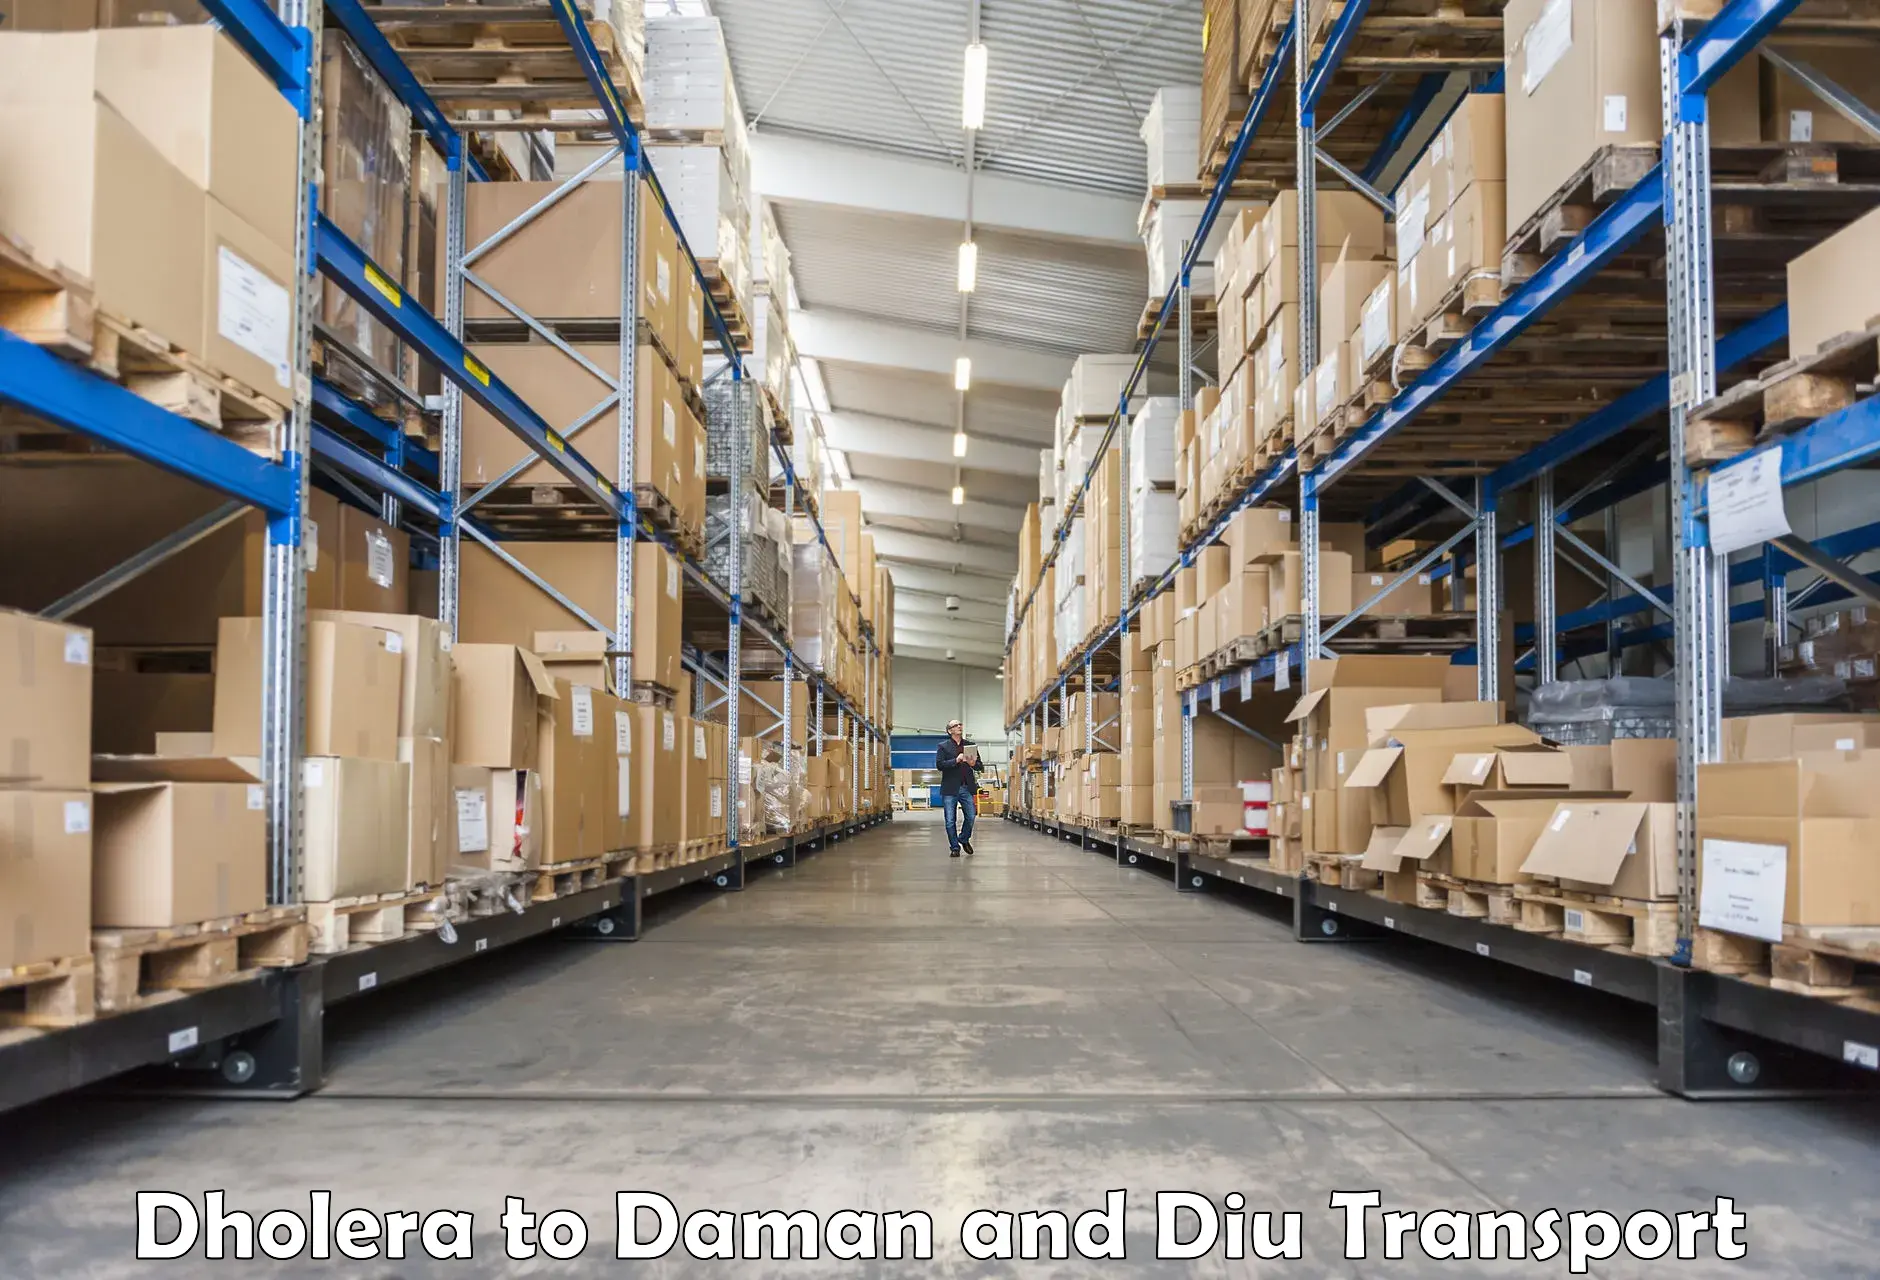 Container transport service Dholera to Daman and Diu